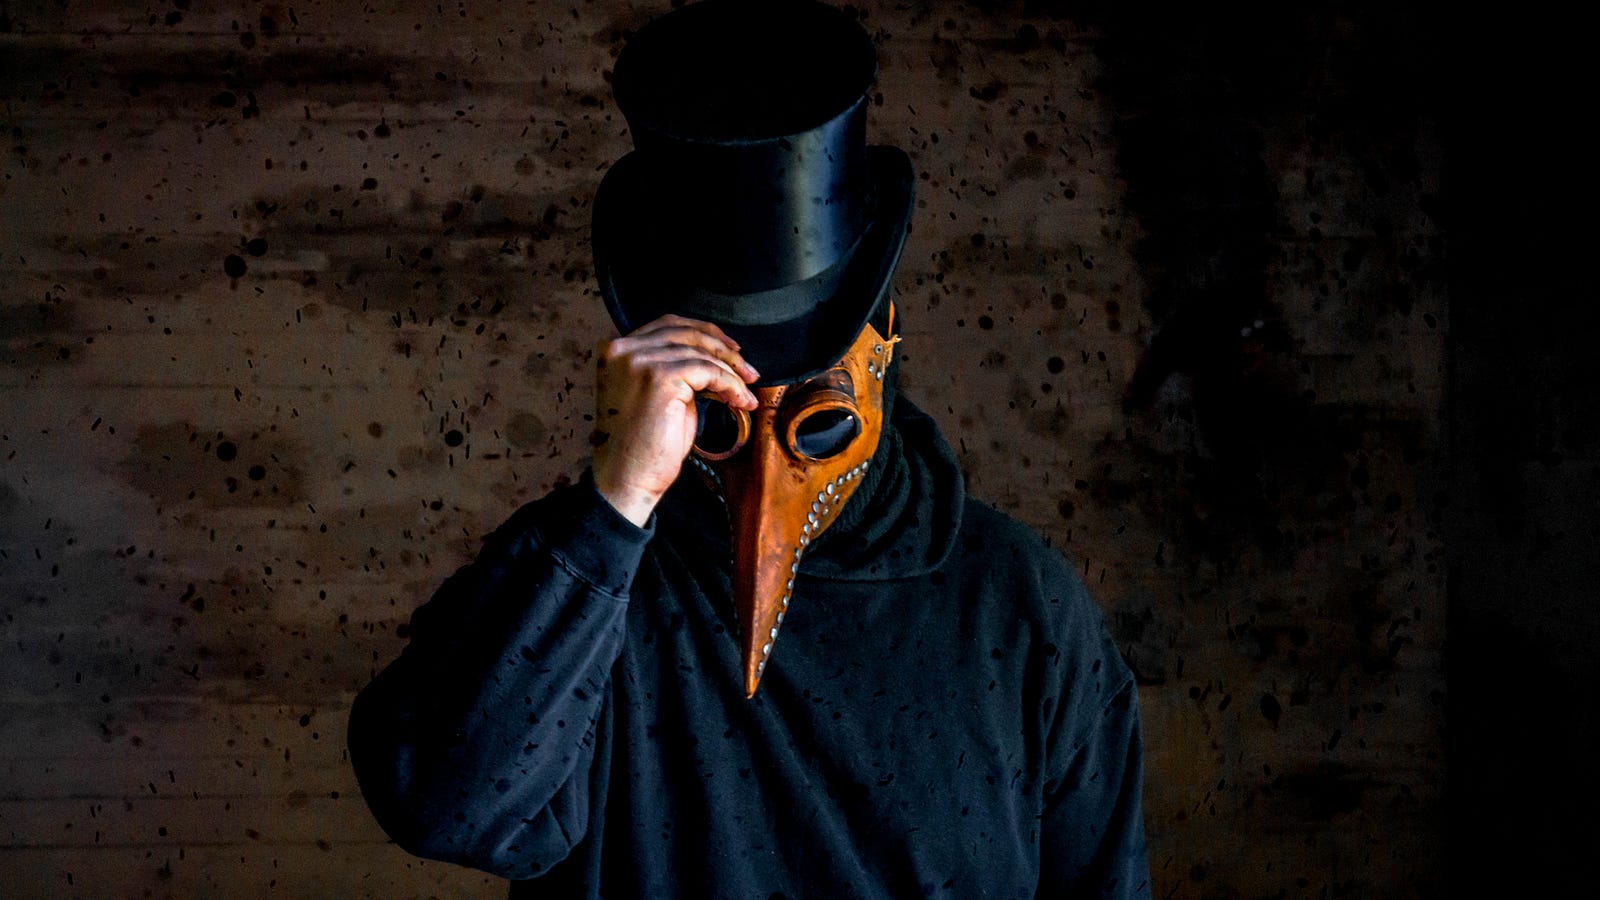 A man with a black robe, top hat, and bird beak resembles doctors from the time of the Black Death (plague). Four medieval thieves reportedly robbed the homes of those suffering from illness and those who had died from the 17th-century plague, the Black Death. The story goes that on moonless nights in Marseilles, France, the thieves would anoint their bodies in vinegar infused with “protective” herbs now known to have antiviral and antibacterial properties.